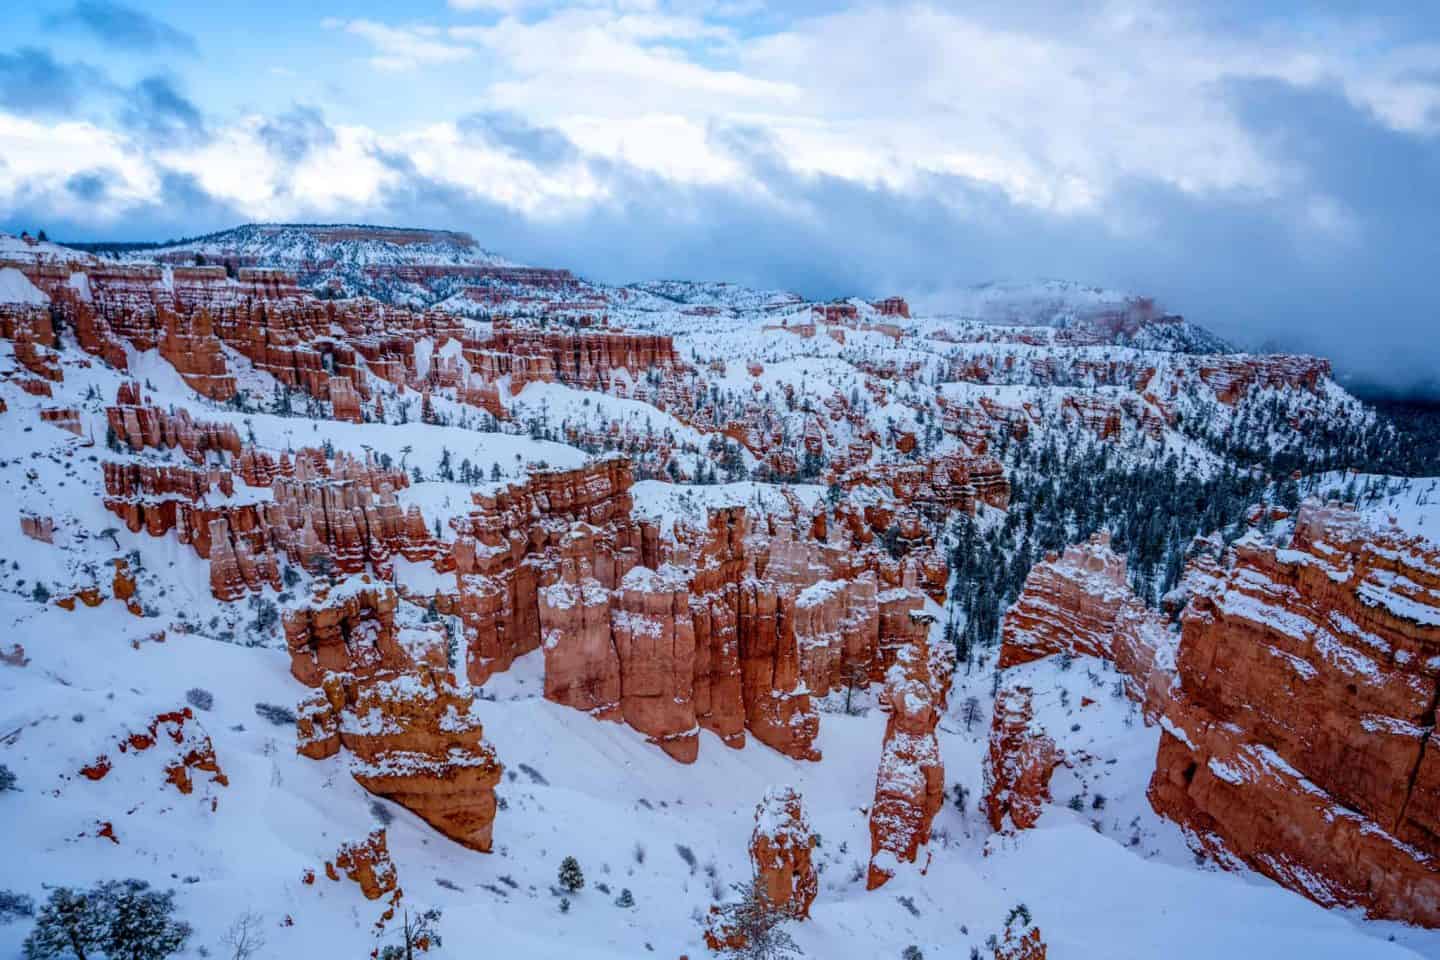 A picture of a snowy day at Bryce Canyon National Park.